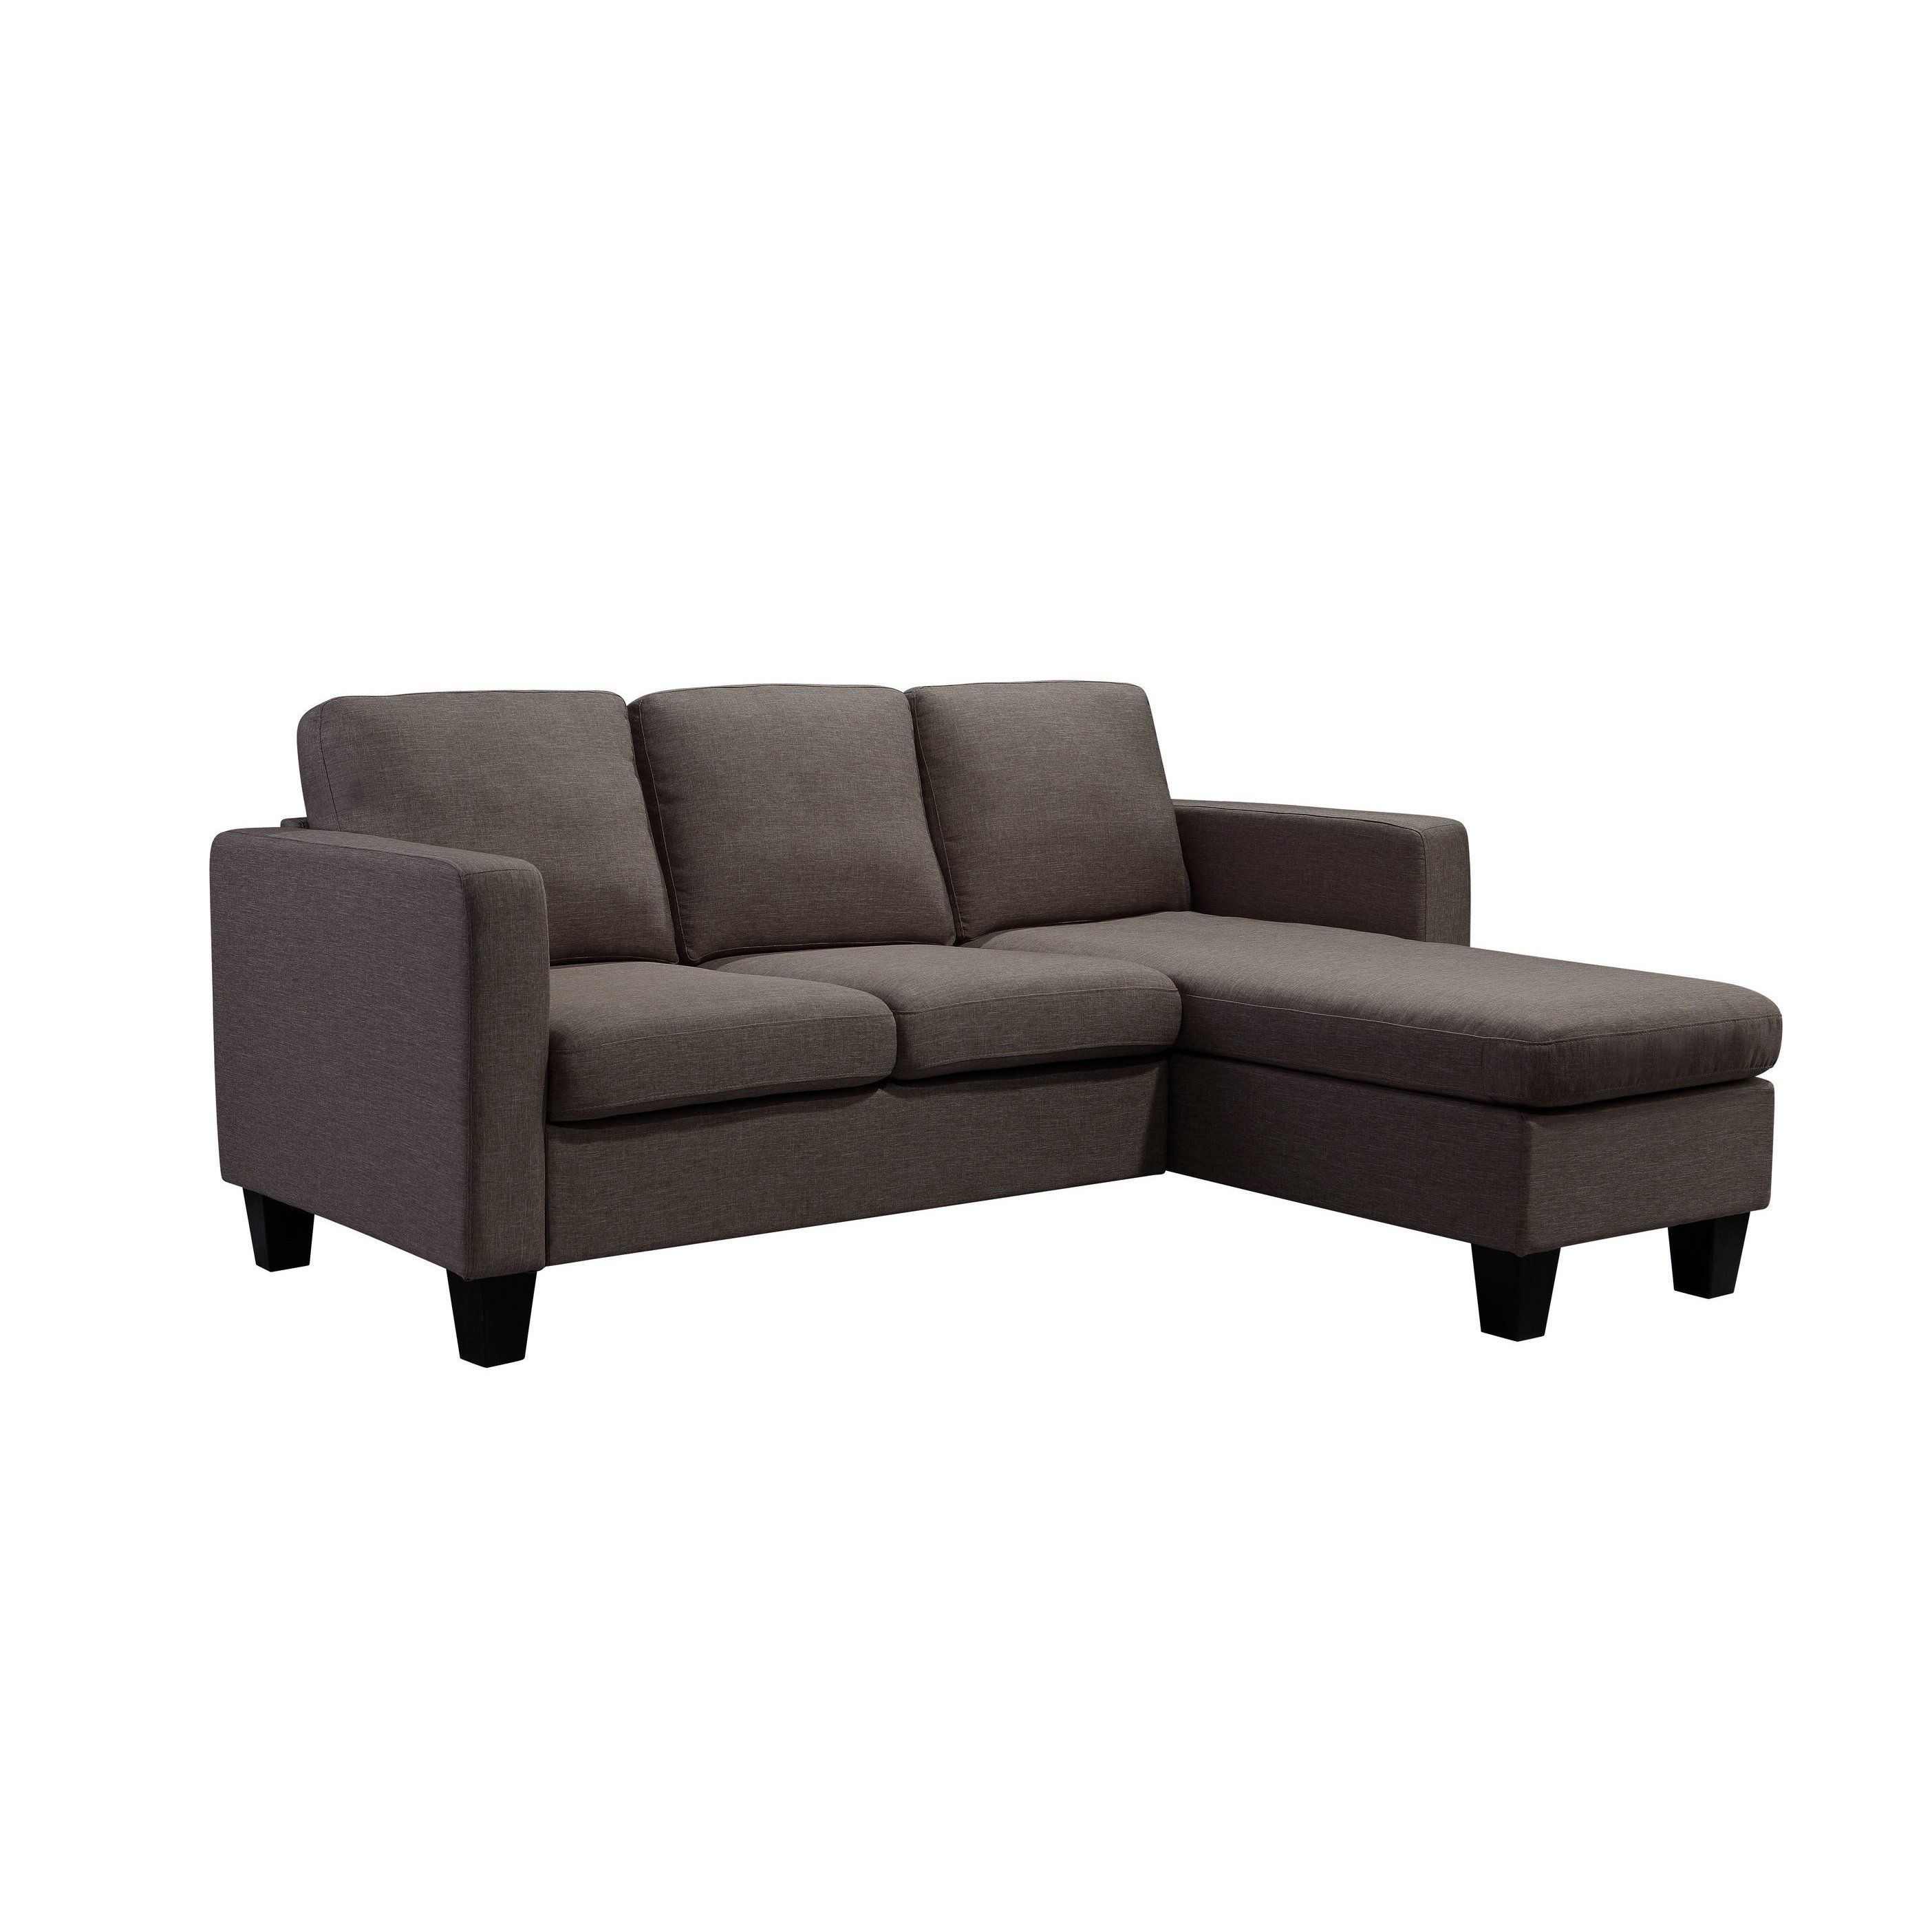 Buy Brown Sectional Sofas Online At Overstock | Our Best Living Throughout Sierra Down 3 Piece Sectionals With Laf Chaise (View 17 of 30)